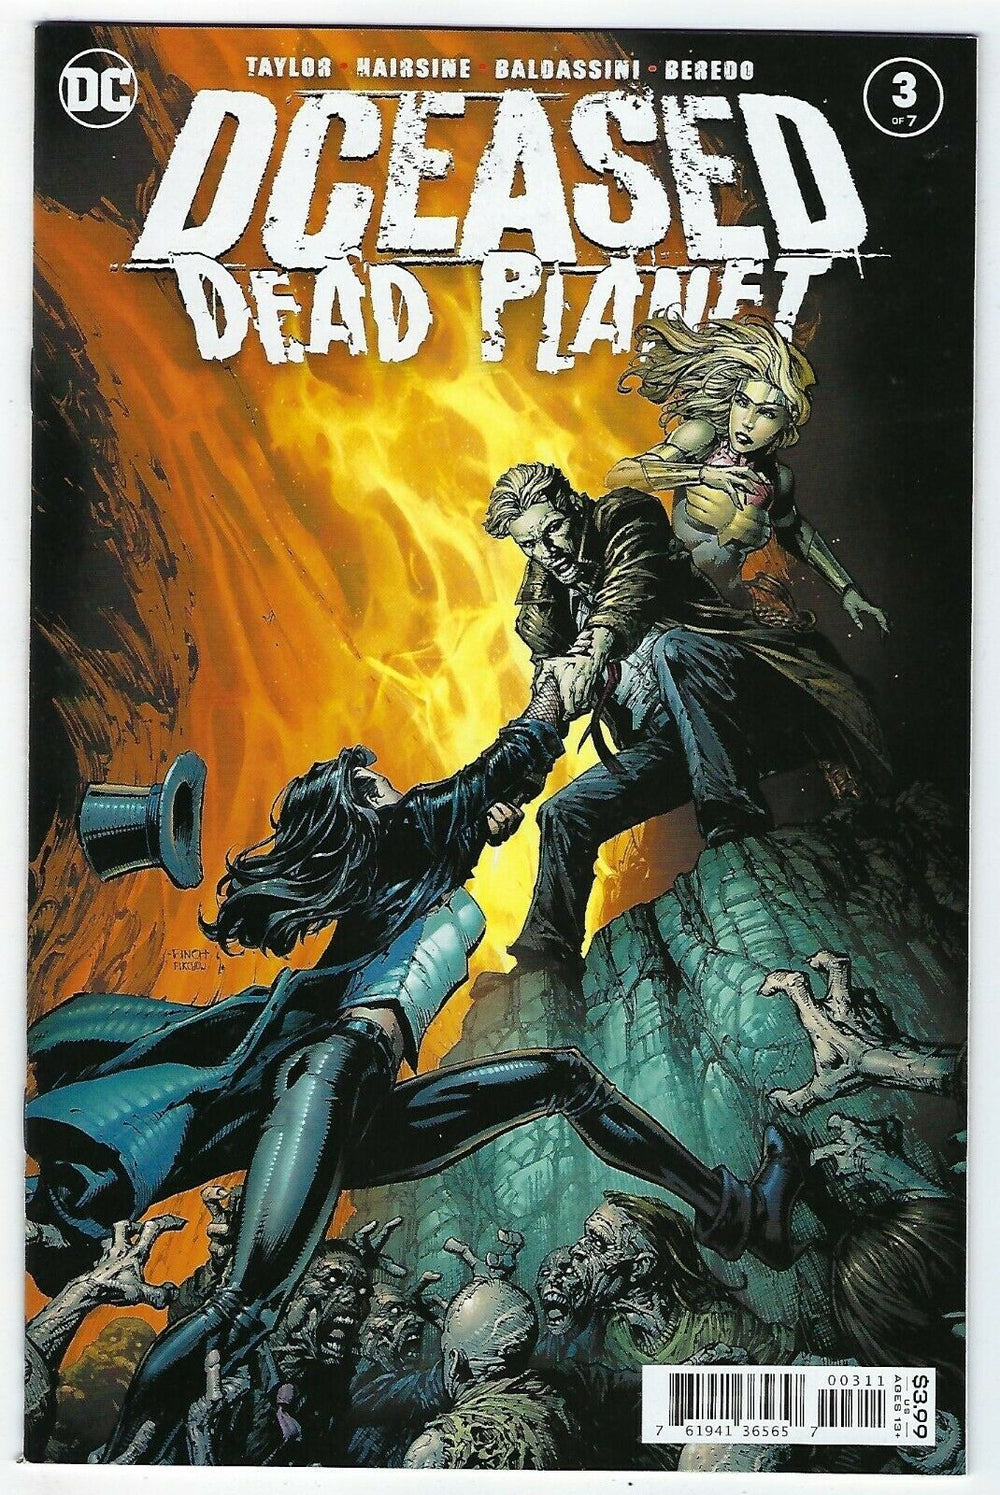 DCEASED DEAD PLANET #3 COVER A